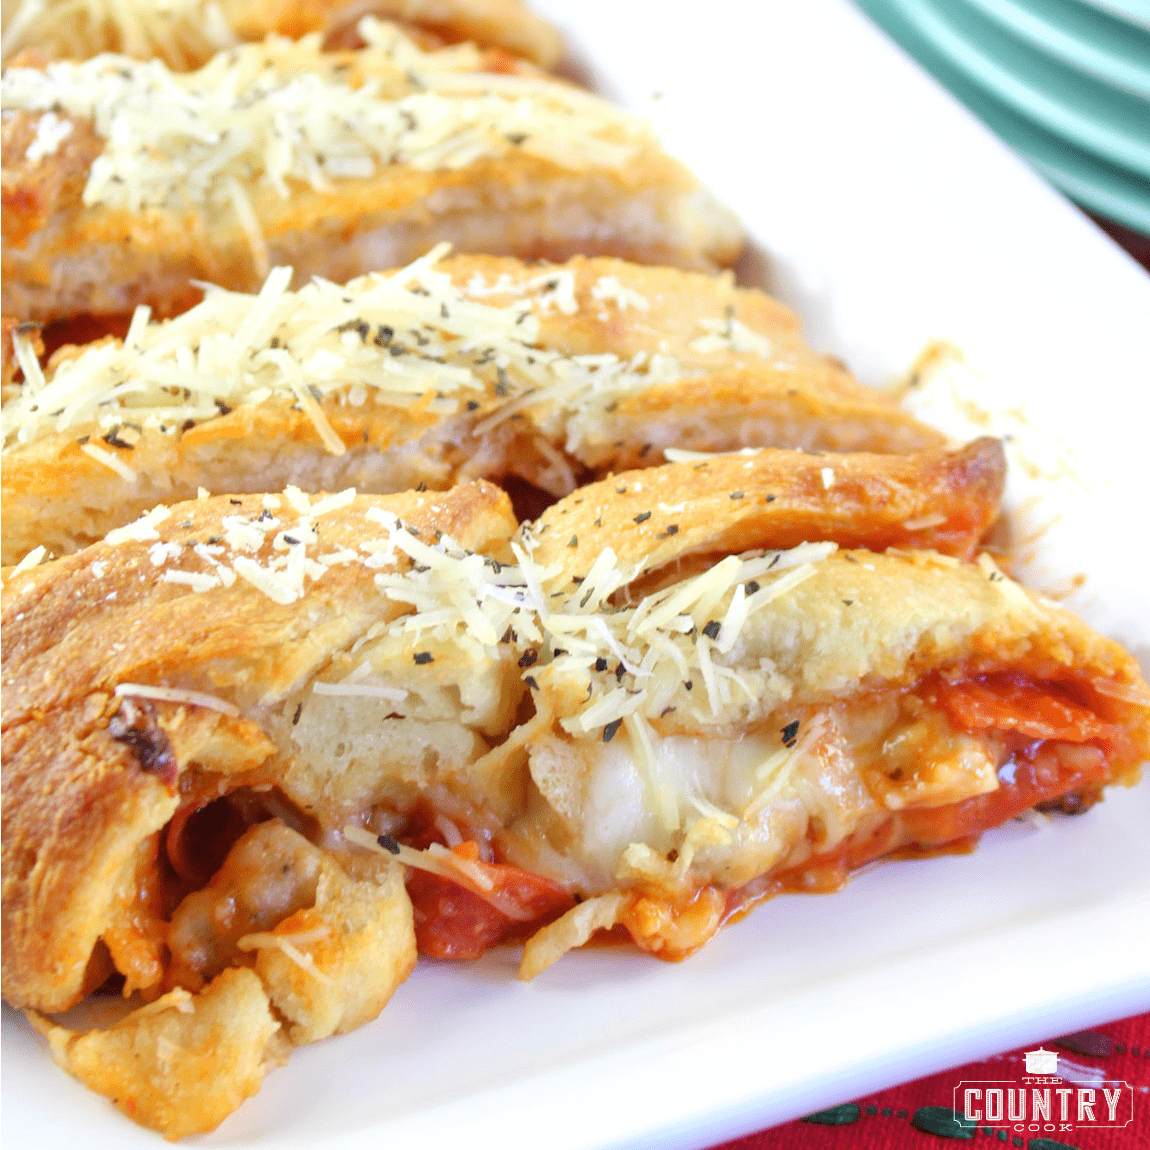 Easy Pepperoni and Sausage Stromboli shown closeup showing the inside filling.